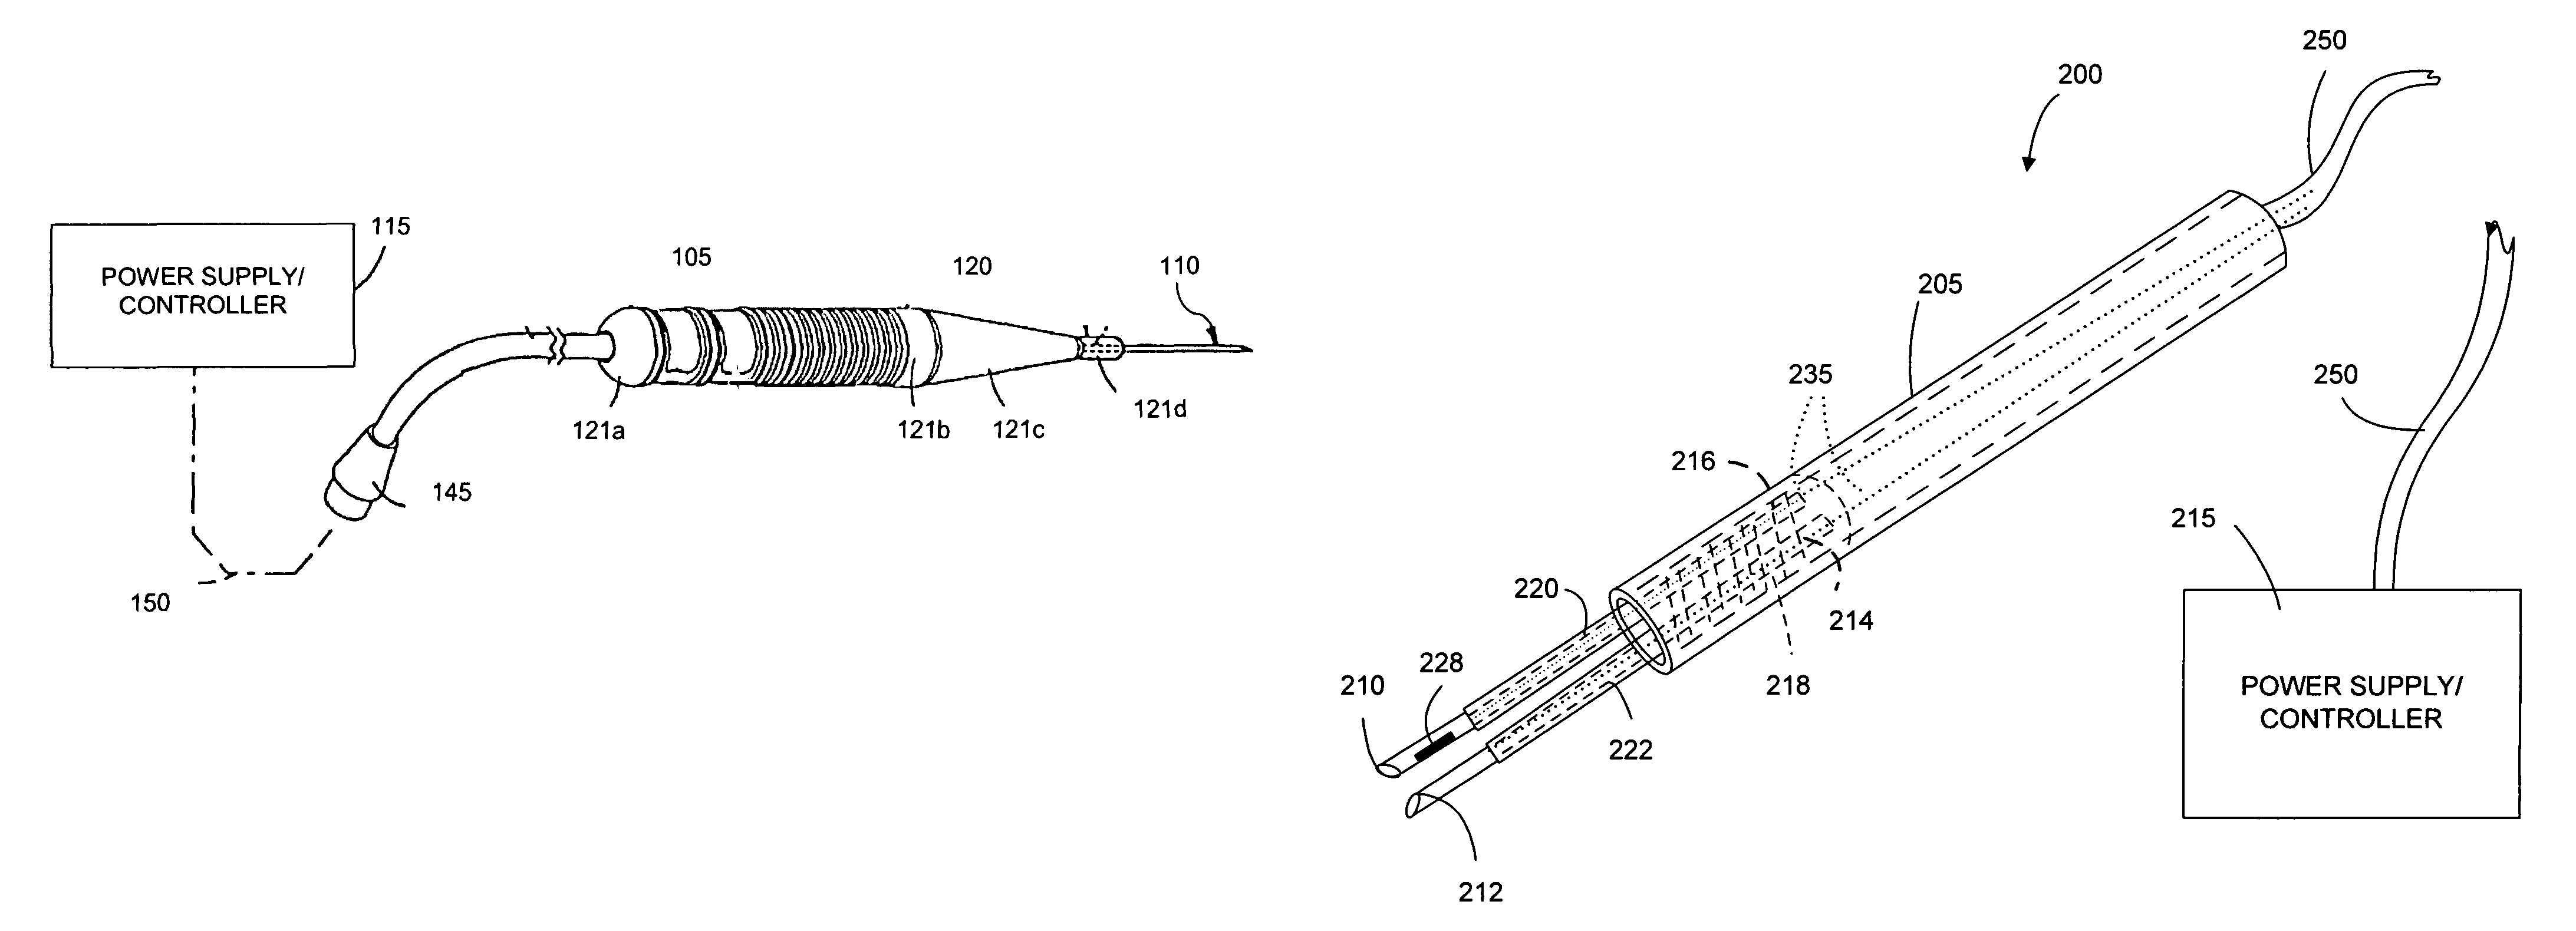 Method and device for less invasive surgical procedures on animals